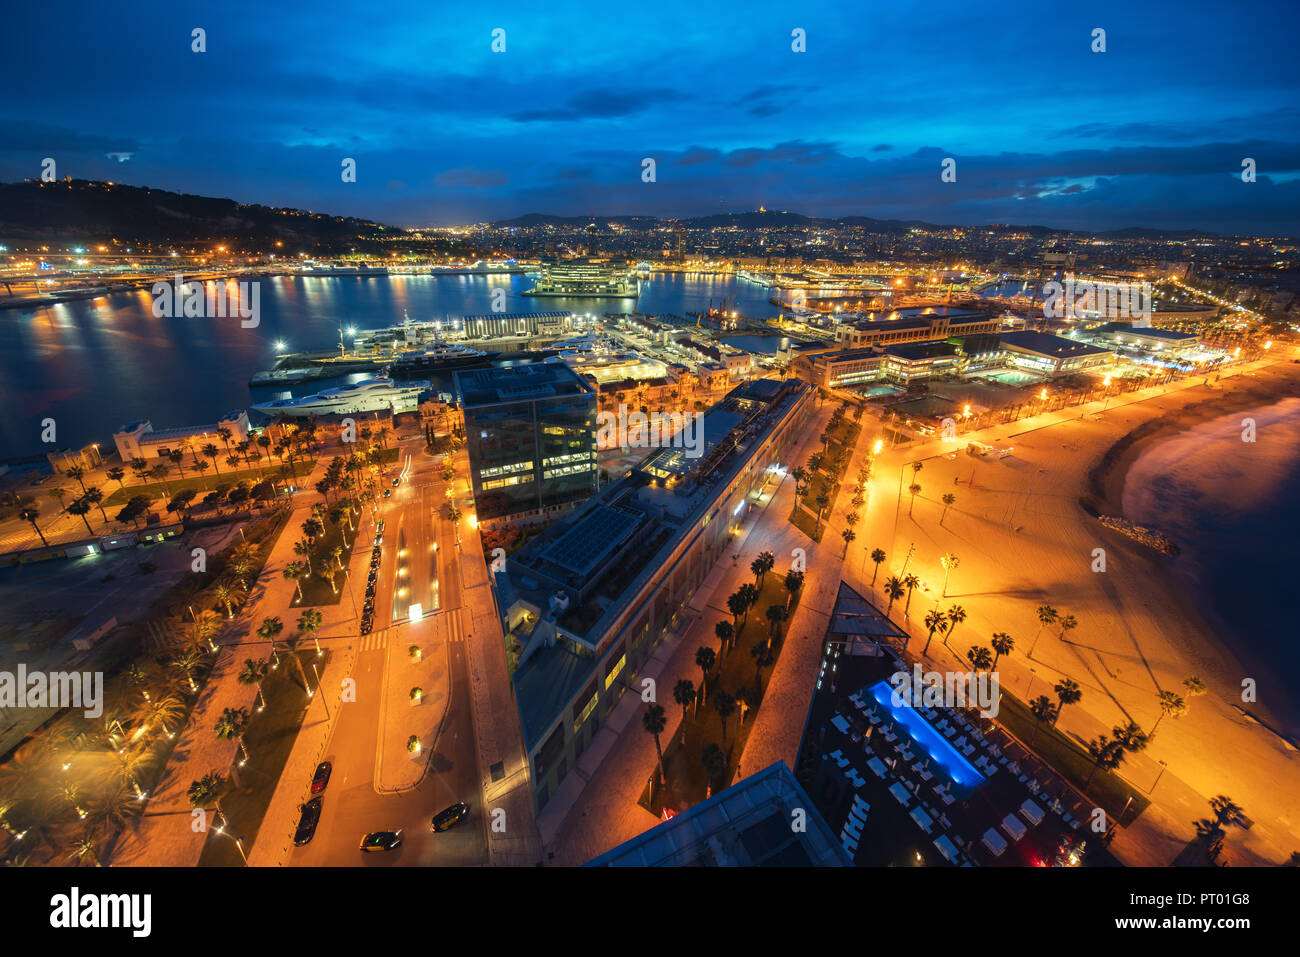 Barcelona city and cruise port, public promenade and cable car over Barceloneta in evening at Barcelona, Catalonia, Spain Stock Photo